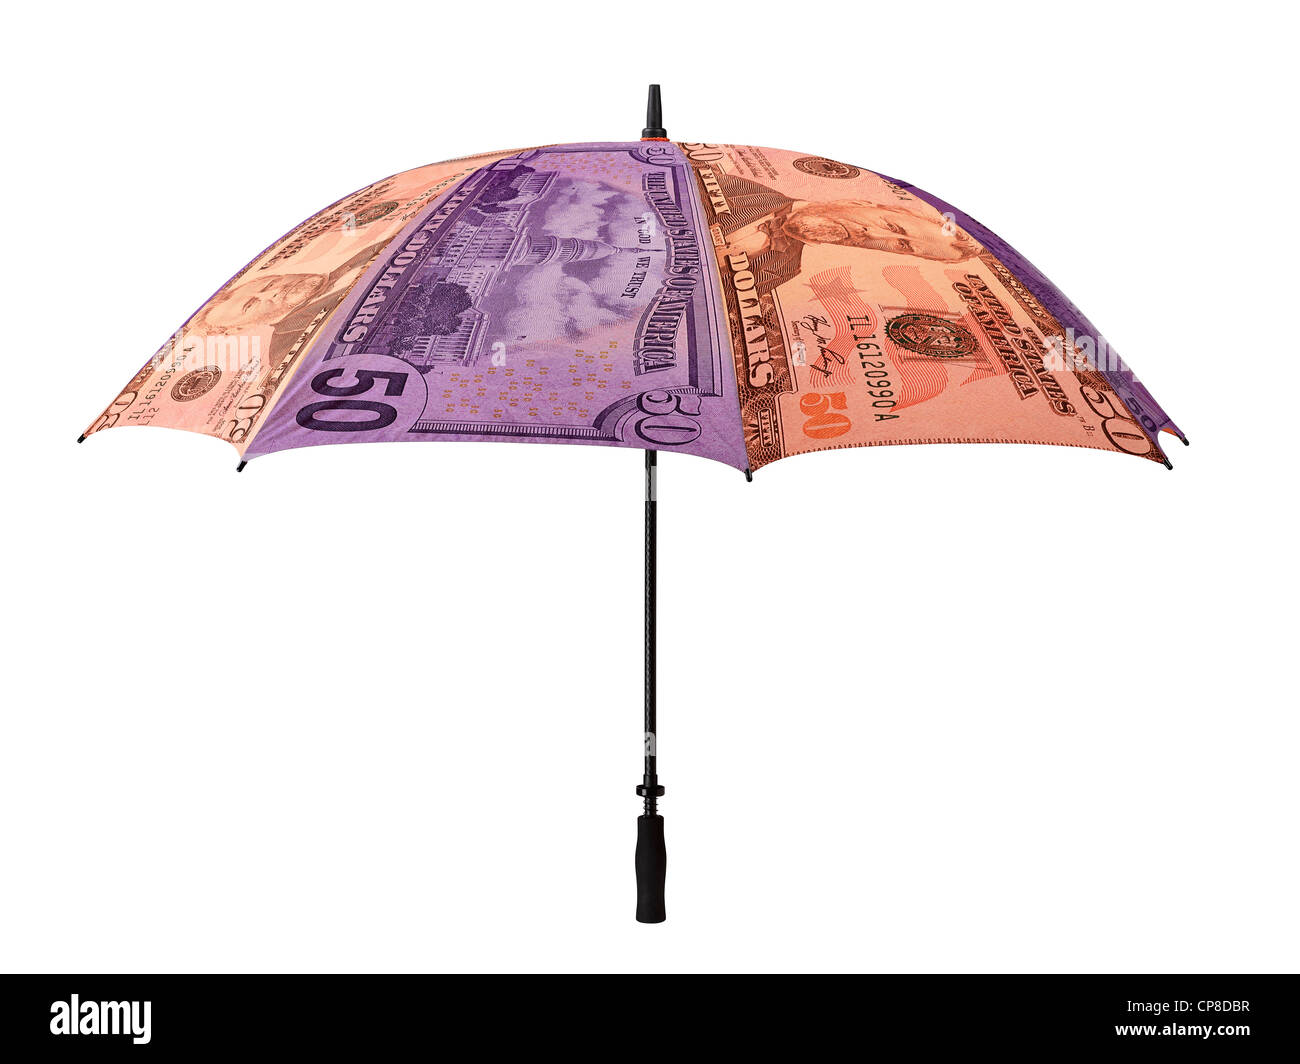 Umbrella Money Banknotes High Resolution Stock Photography and Images -  Alamy